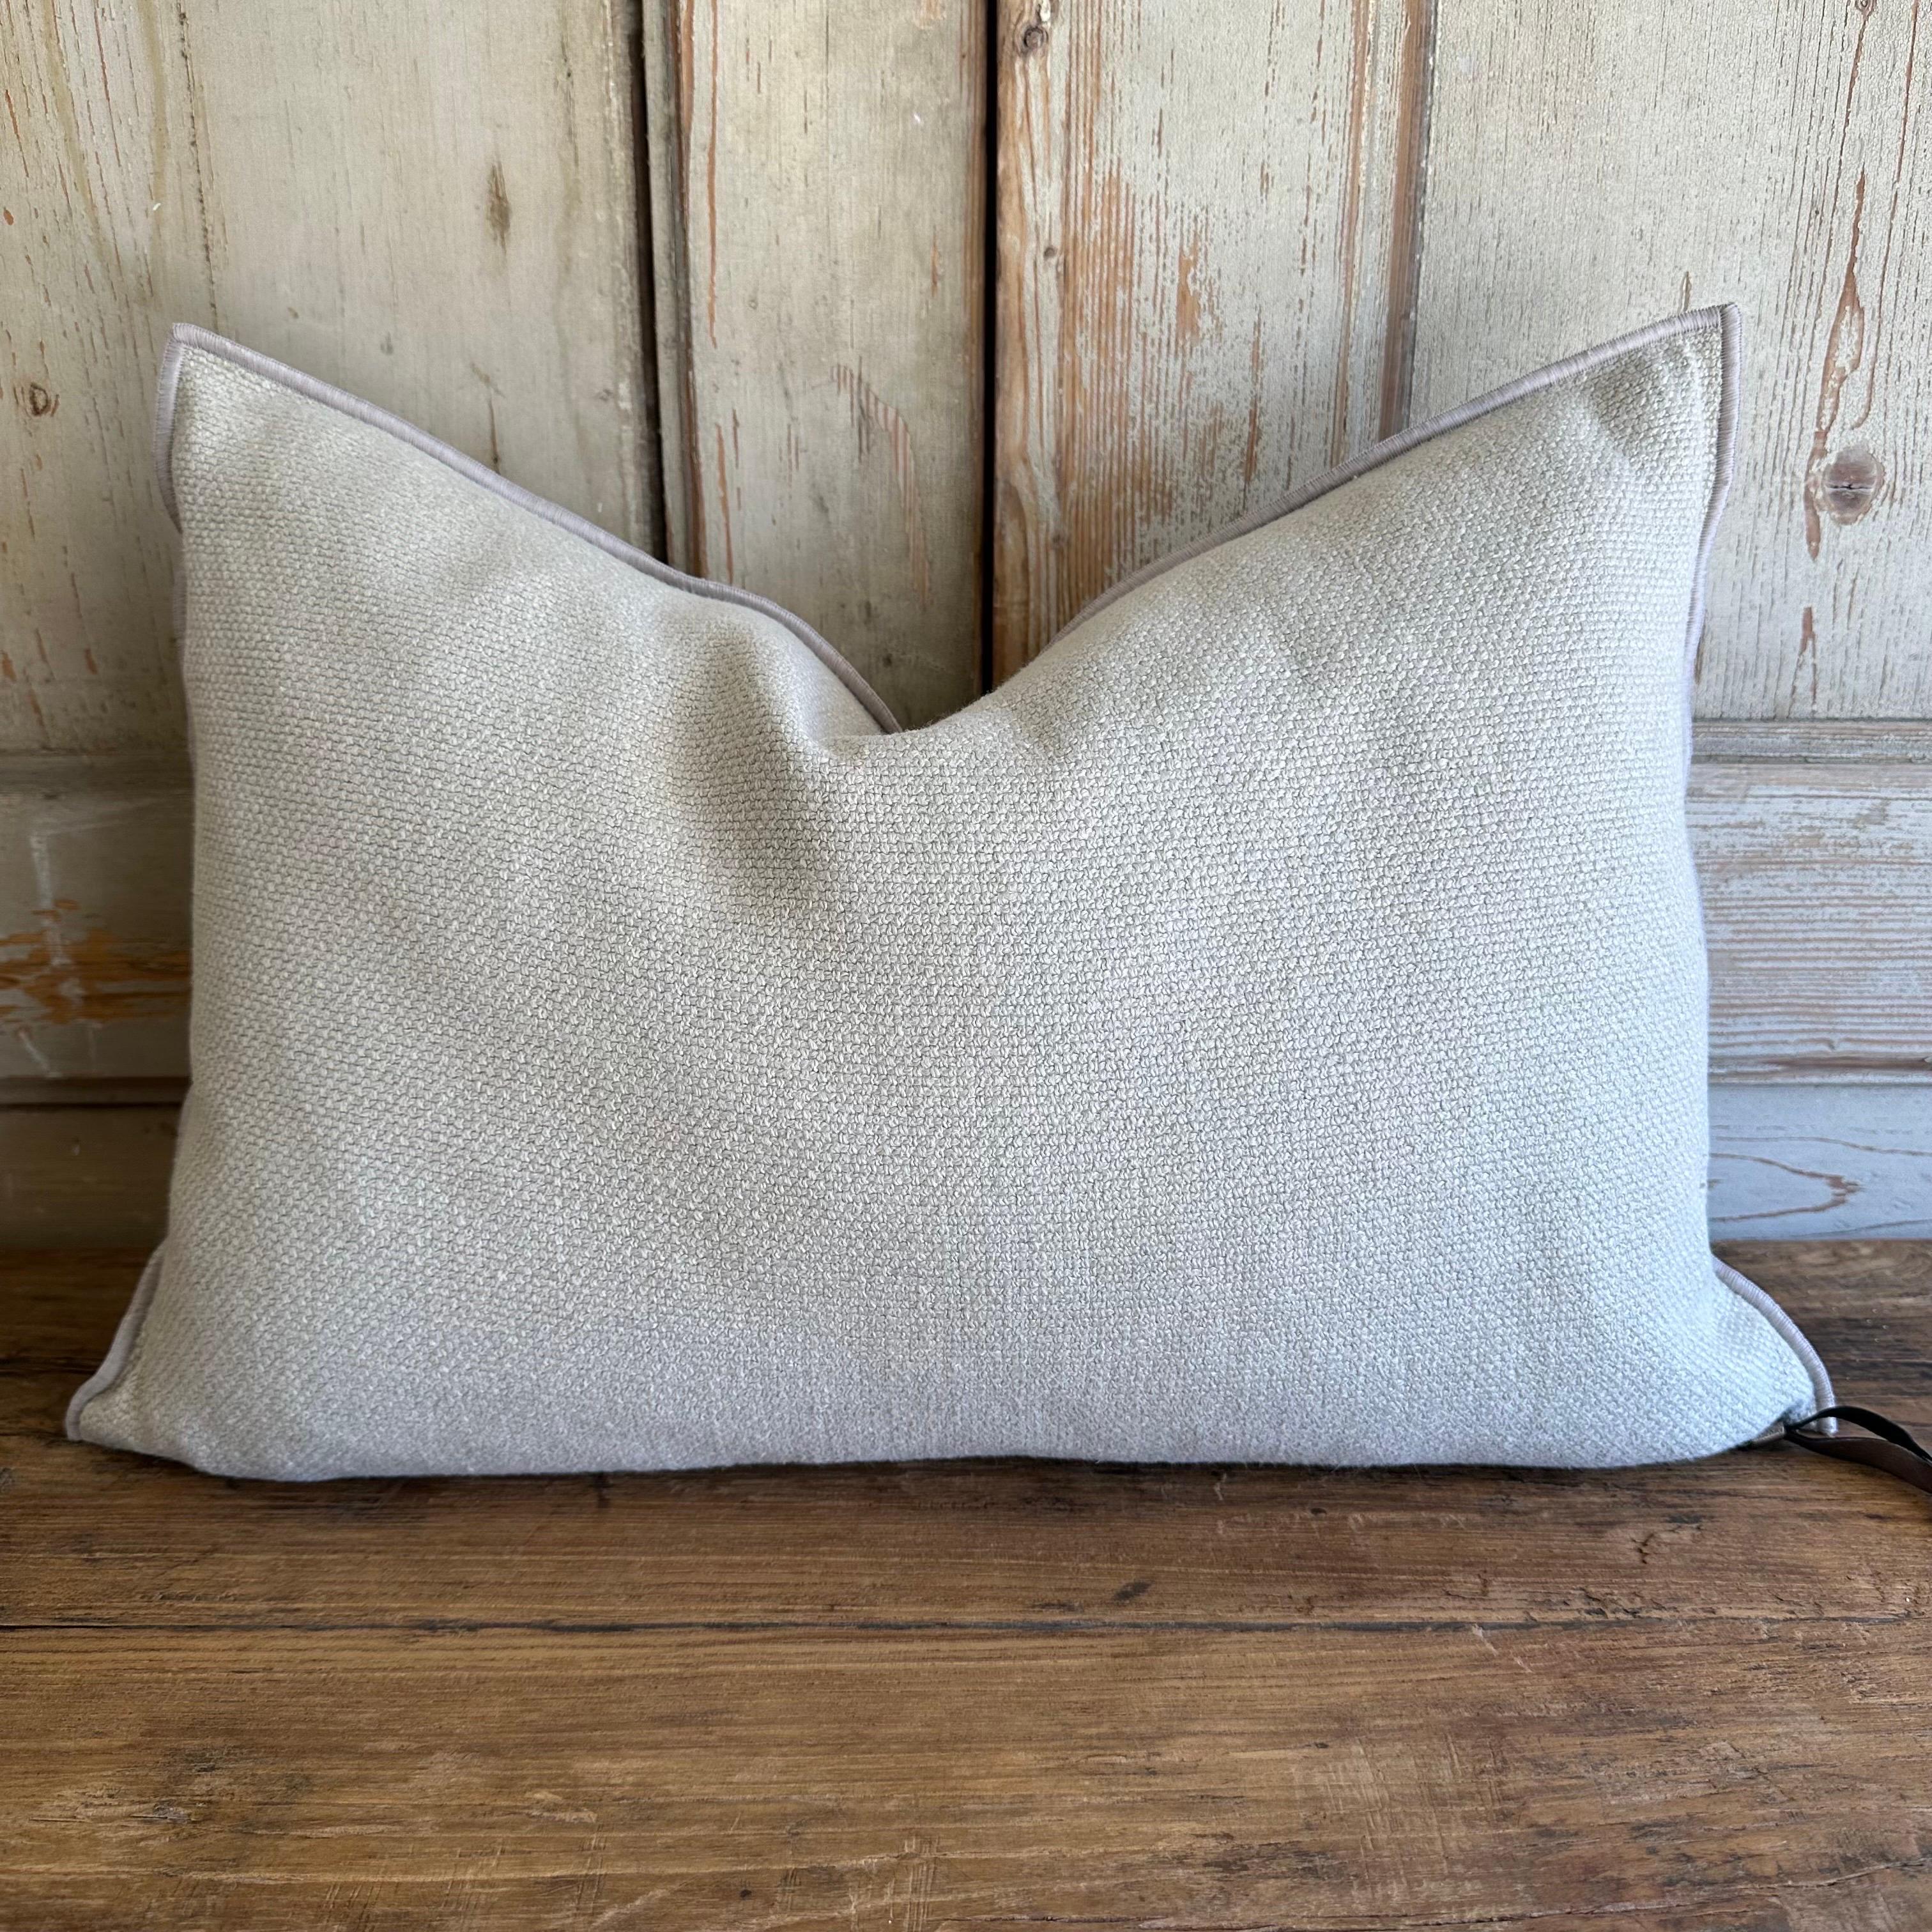 Custom linen blend accent pillow. 
Color: Ciment A pretty light grey colored nubby style pillow with a stitched edge, metal zipper closure. 
Size: 14